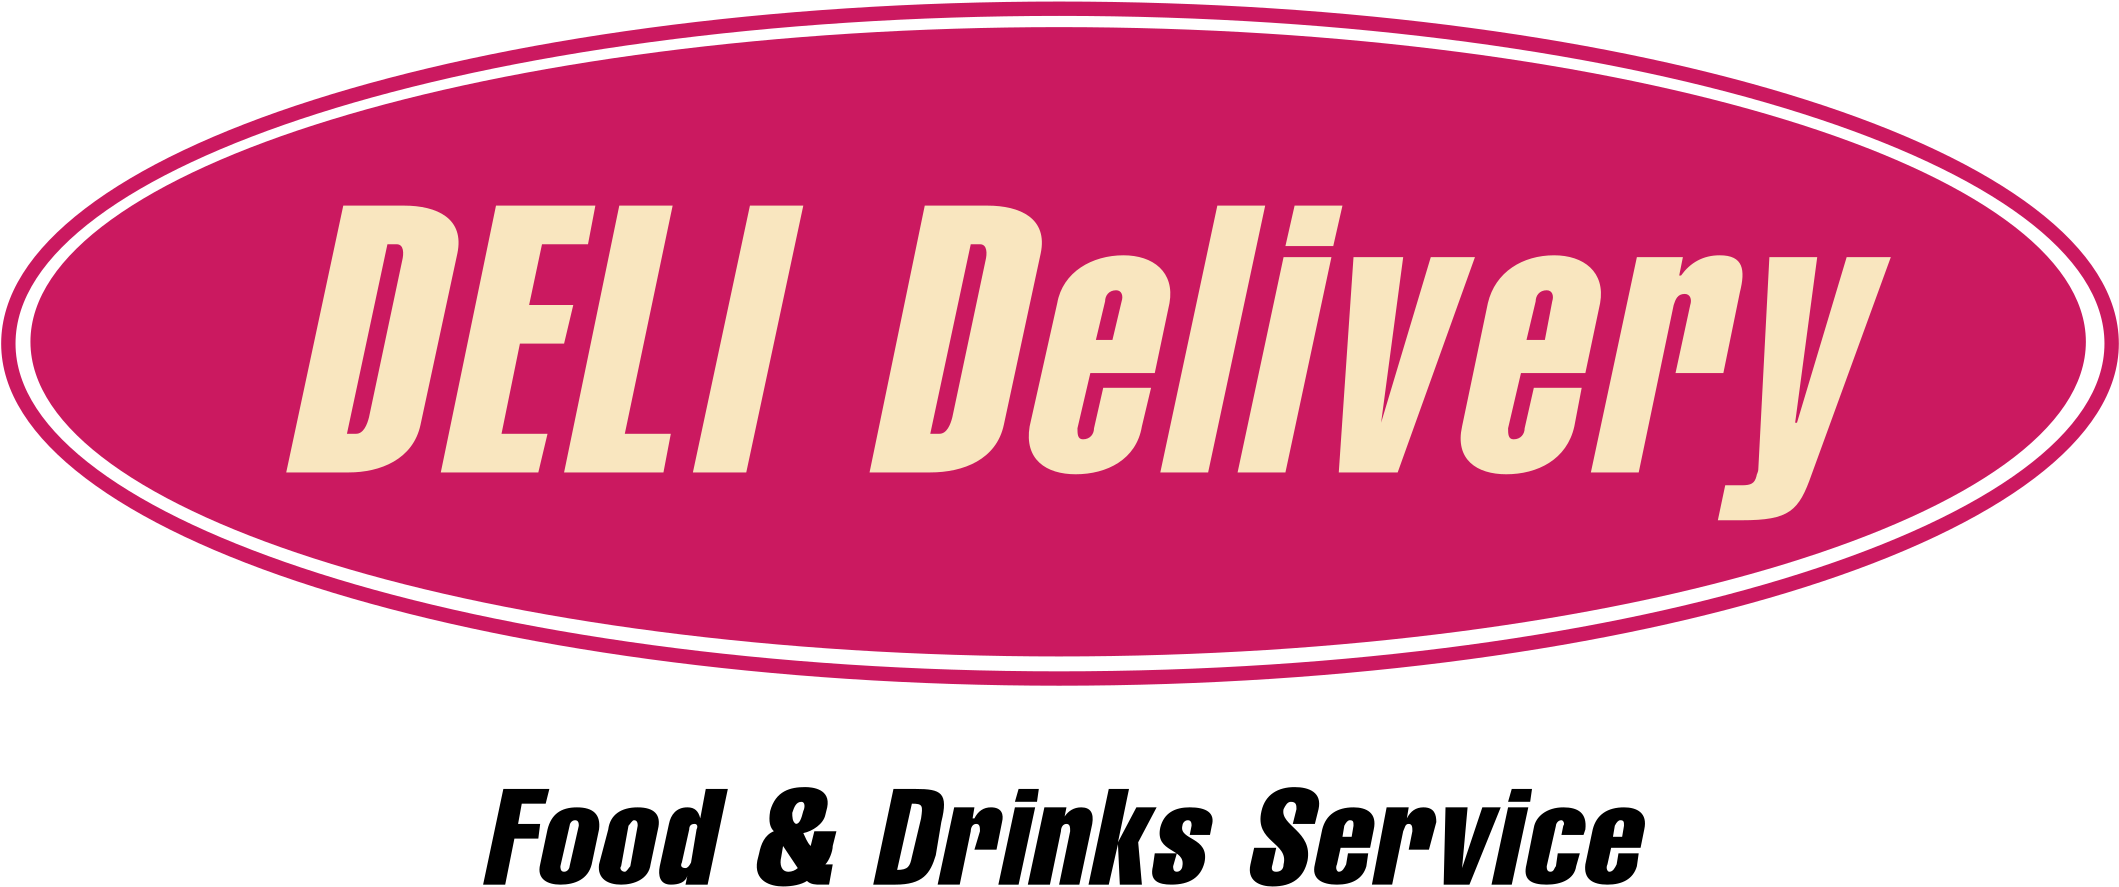 Deli Delivery Logo Png Transparent - The Mckinstry Co (2400x2400), Png Download